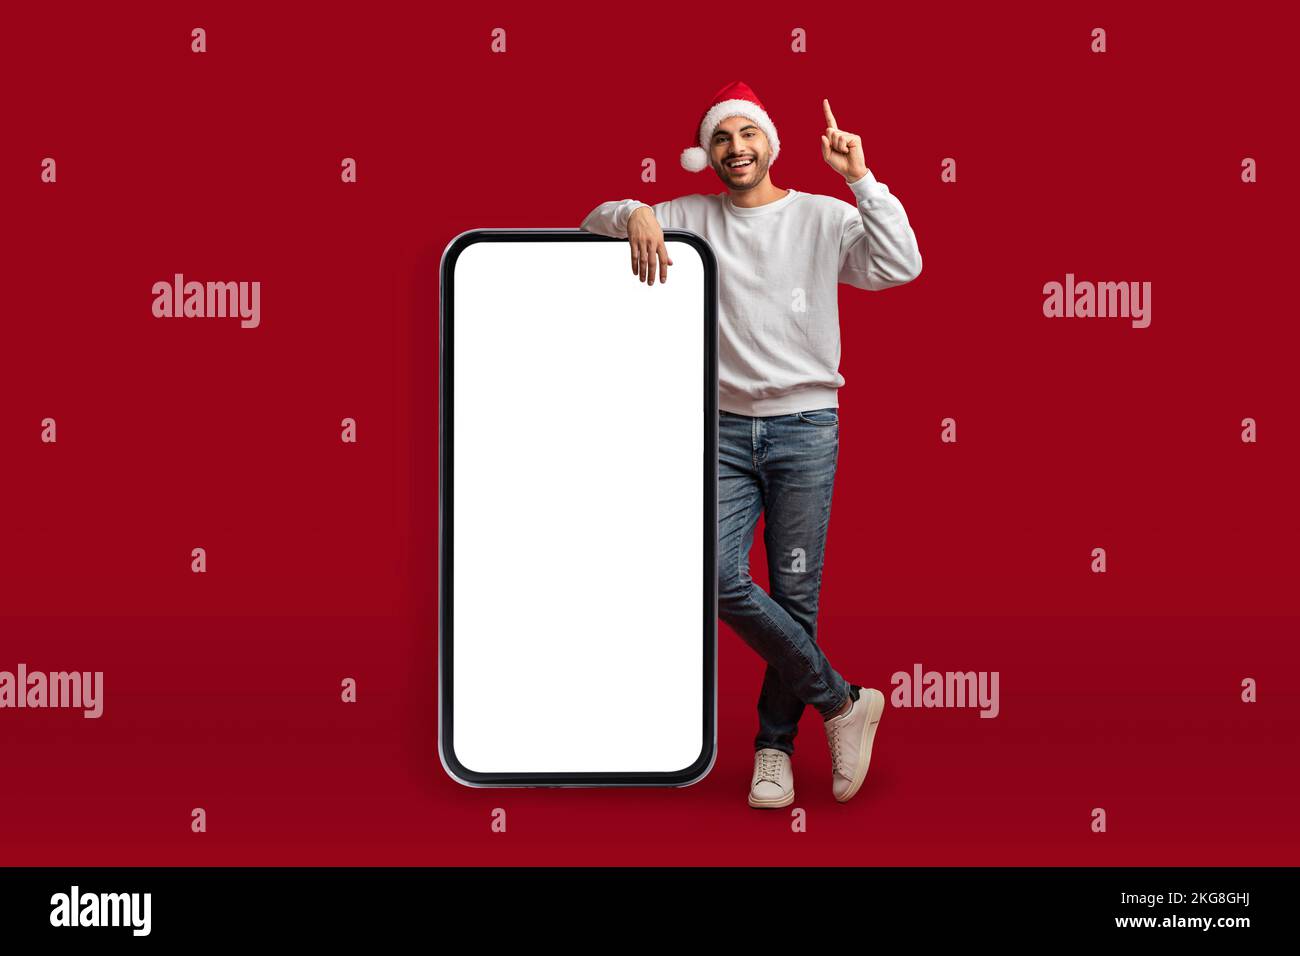 Chistmas Idea. Excited Arab Man In Santa Hat Standing Near Blank Smartphone Stock Photo